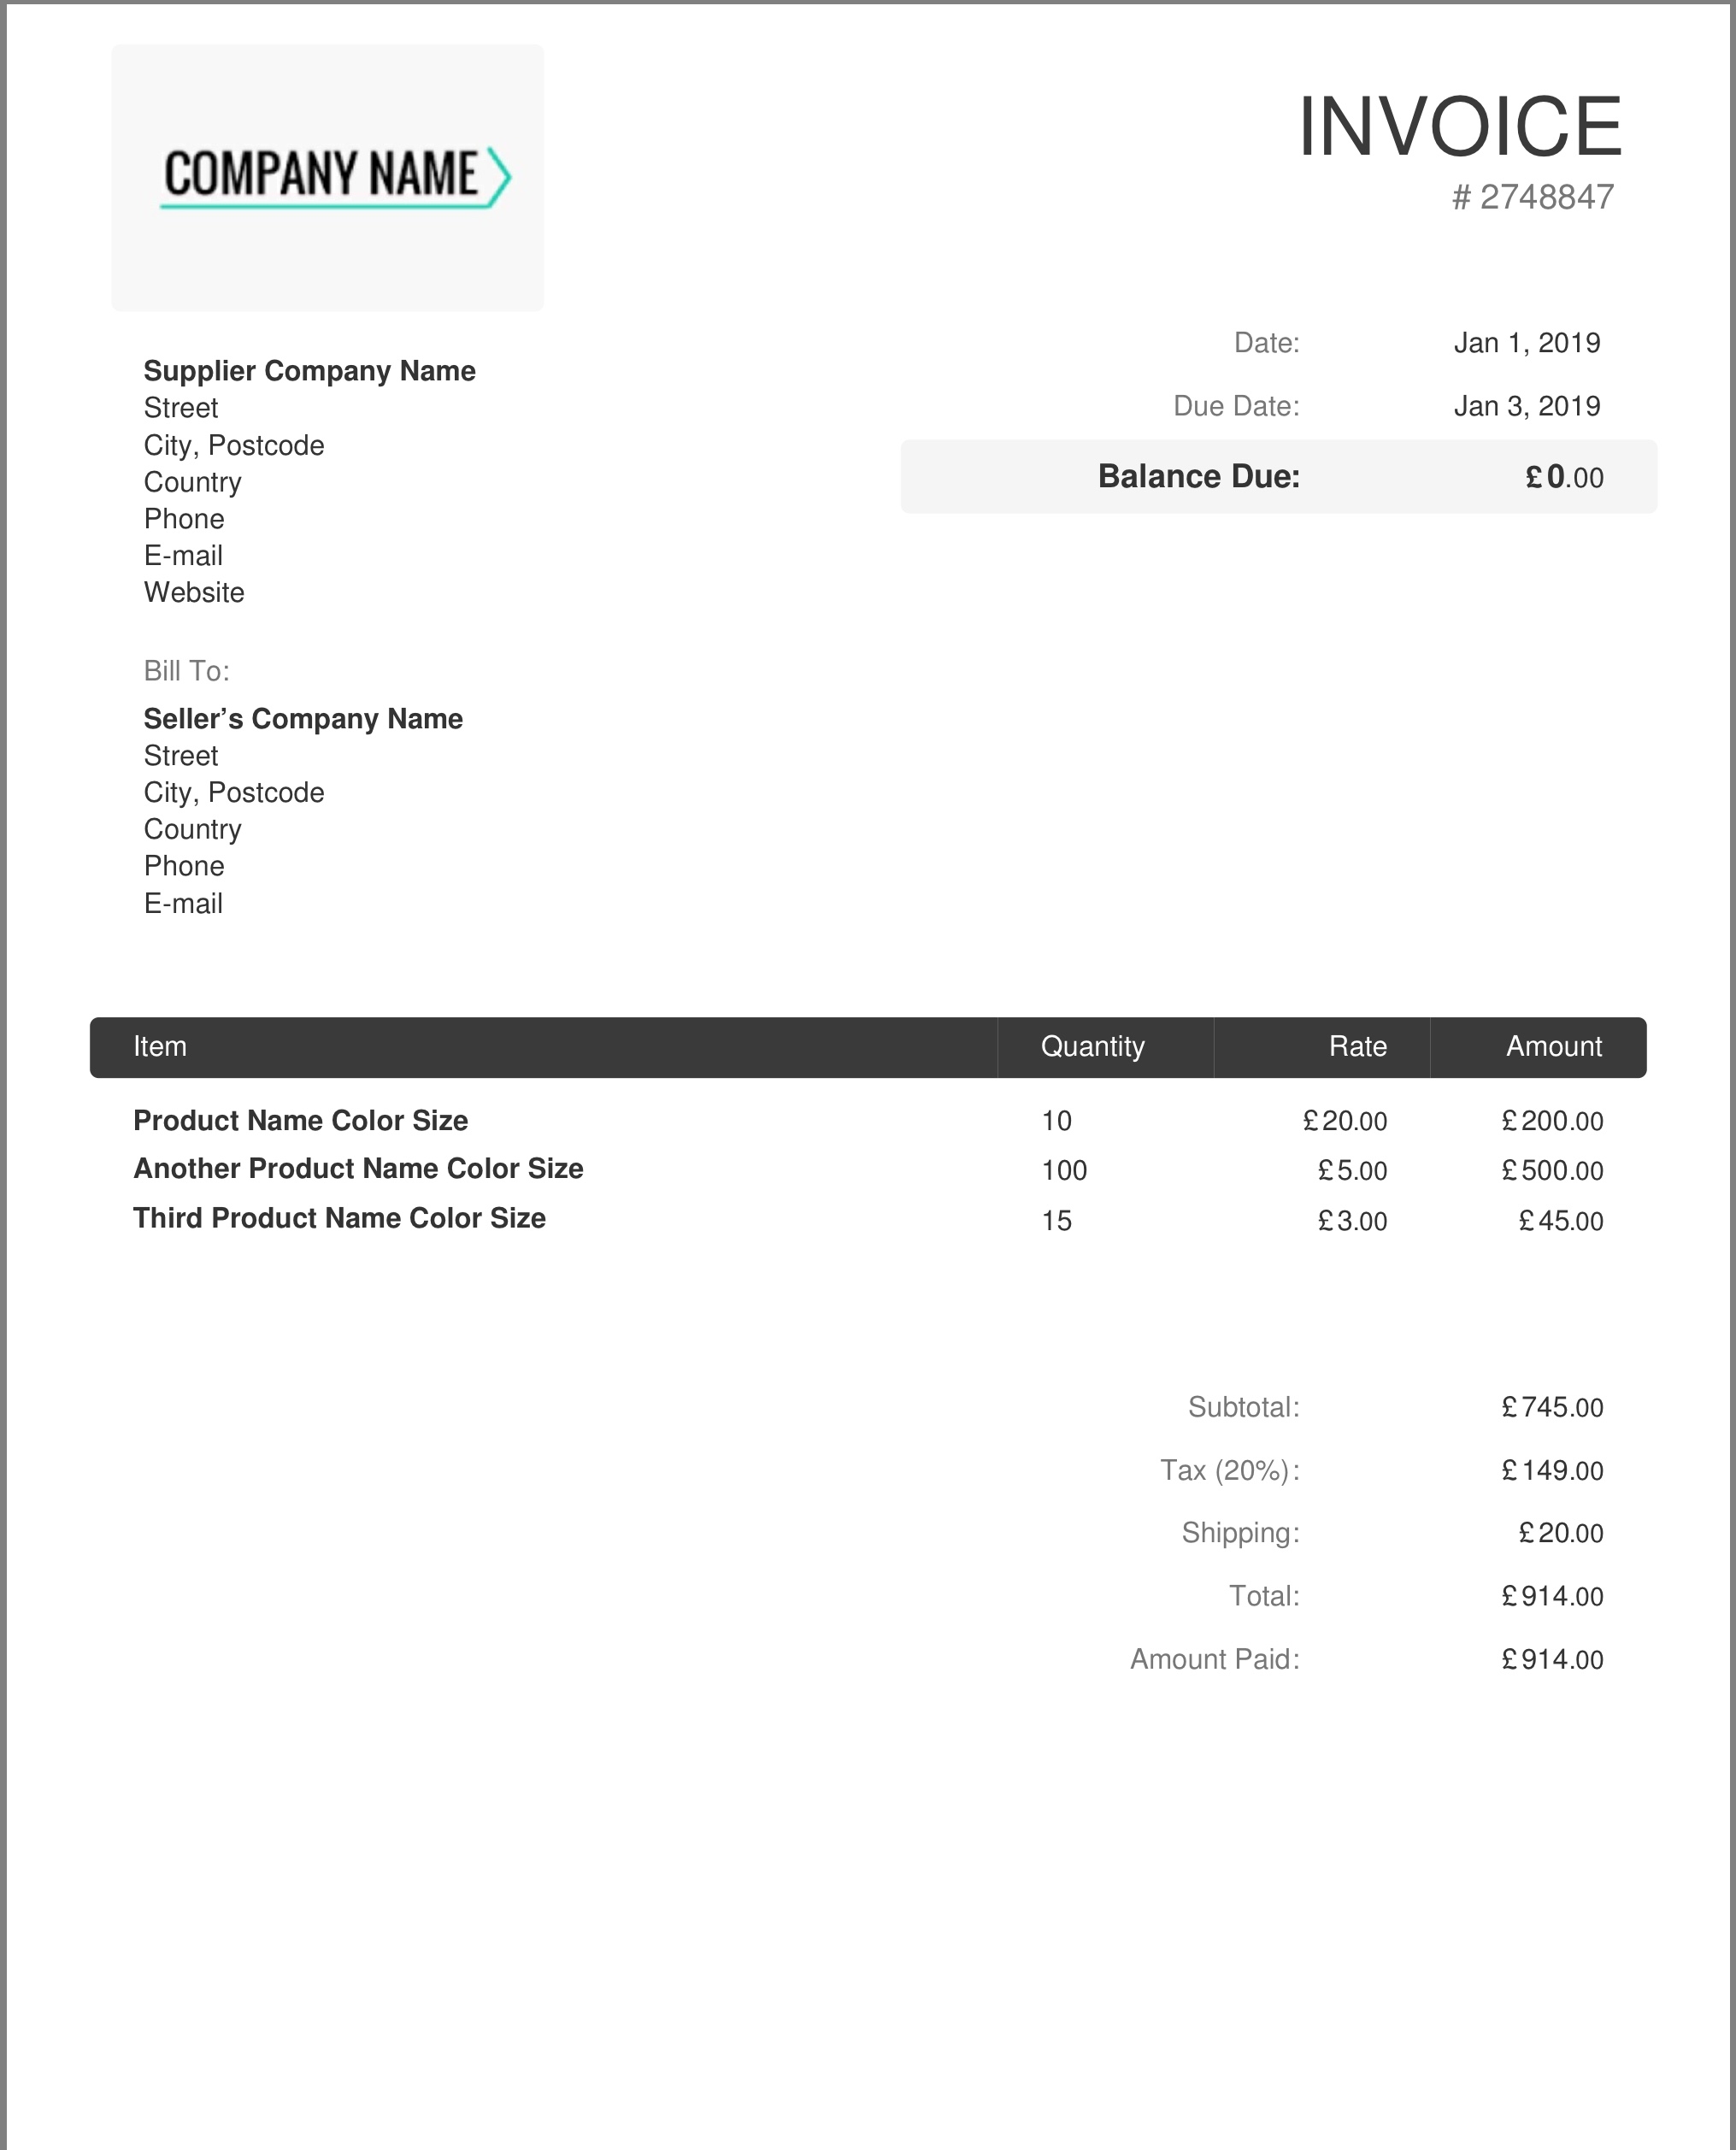 Image Of Invoice For Amazon